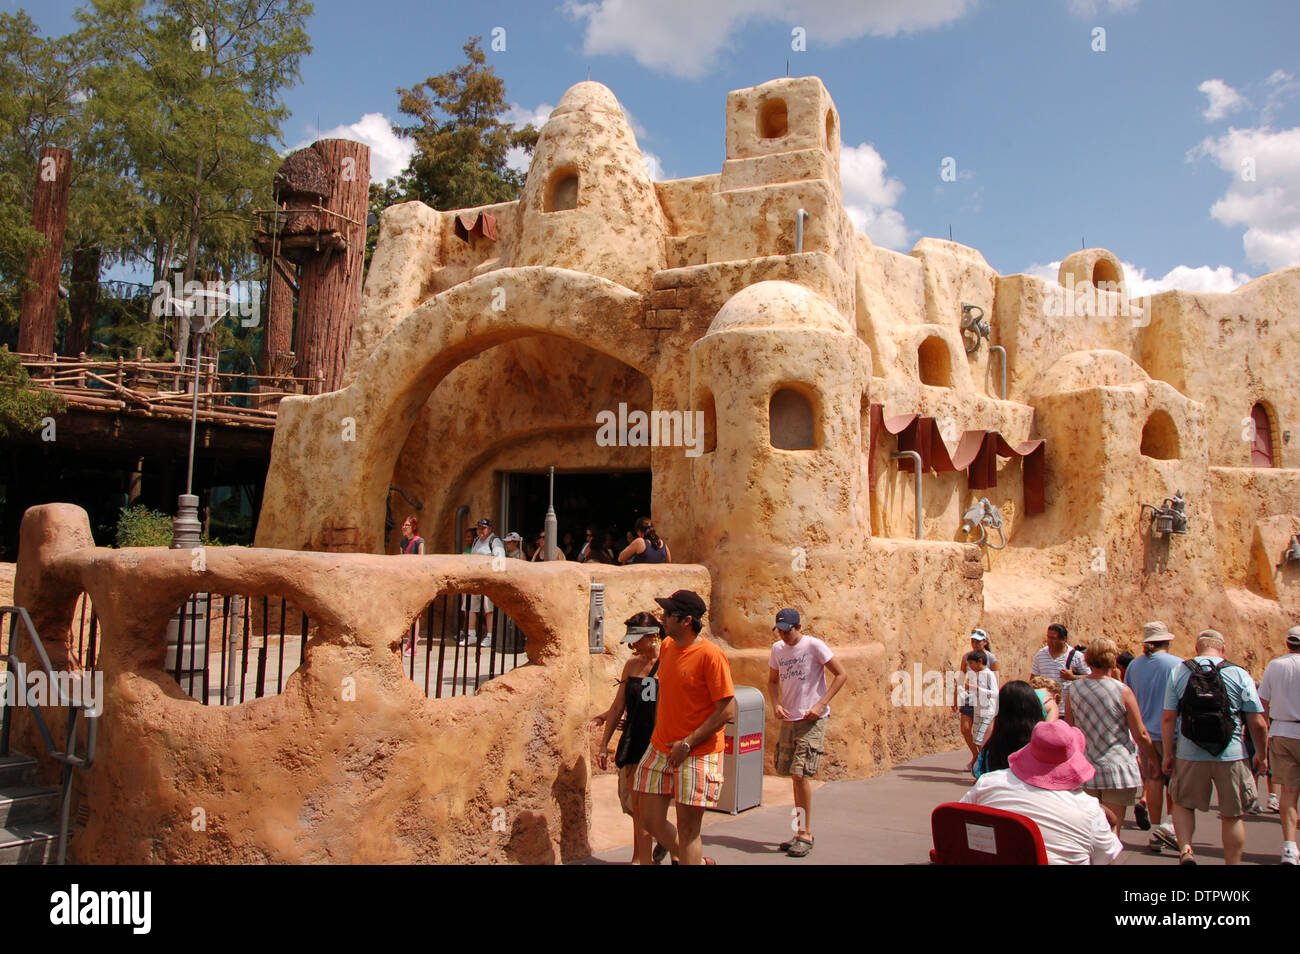 Huge brown stone effect castle at the Walt Disney's Hollywood Studios in Orlando, Florida, U.S.A Stock Photo